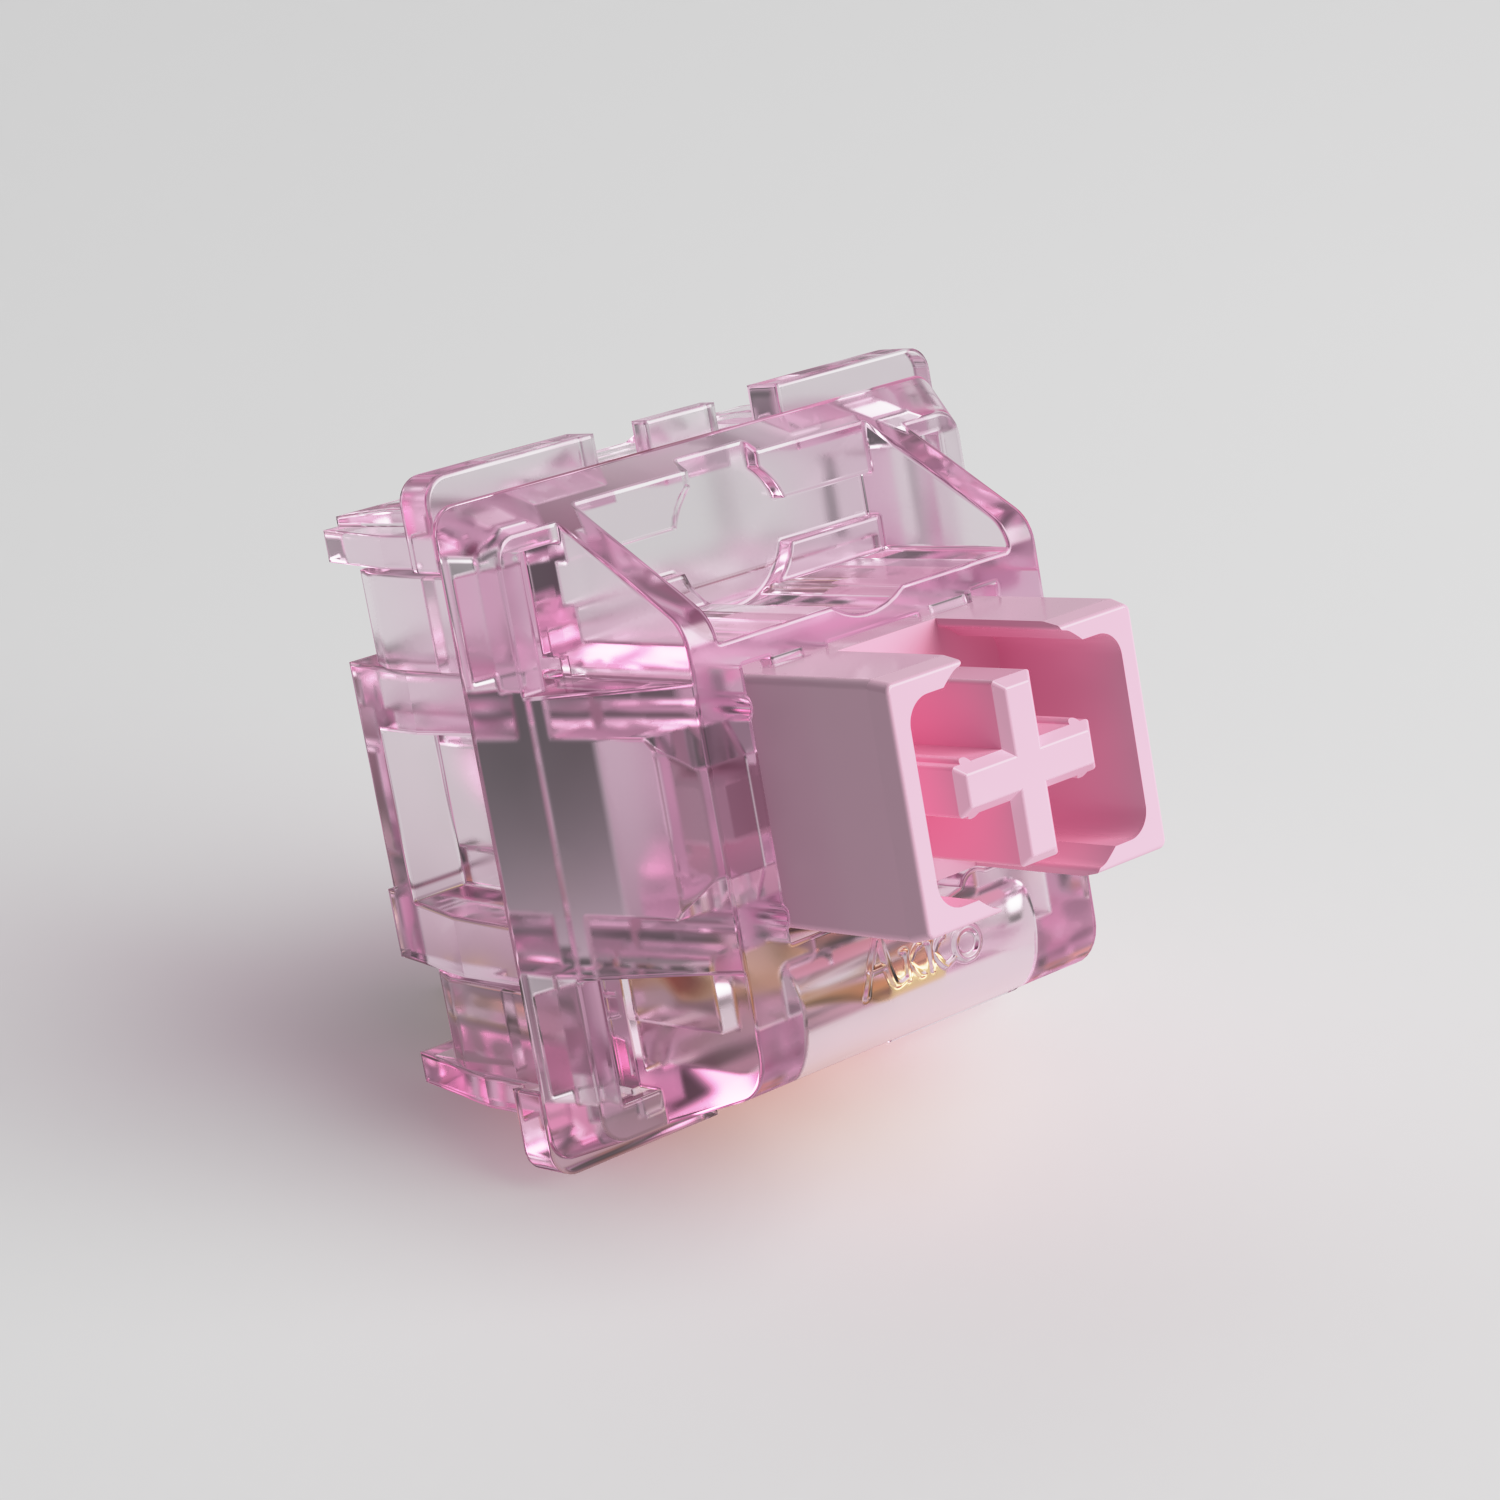 Pink jelly